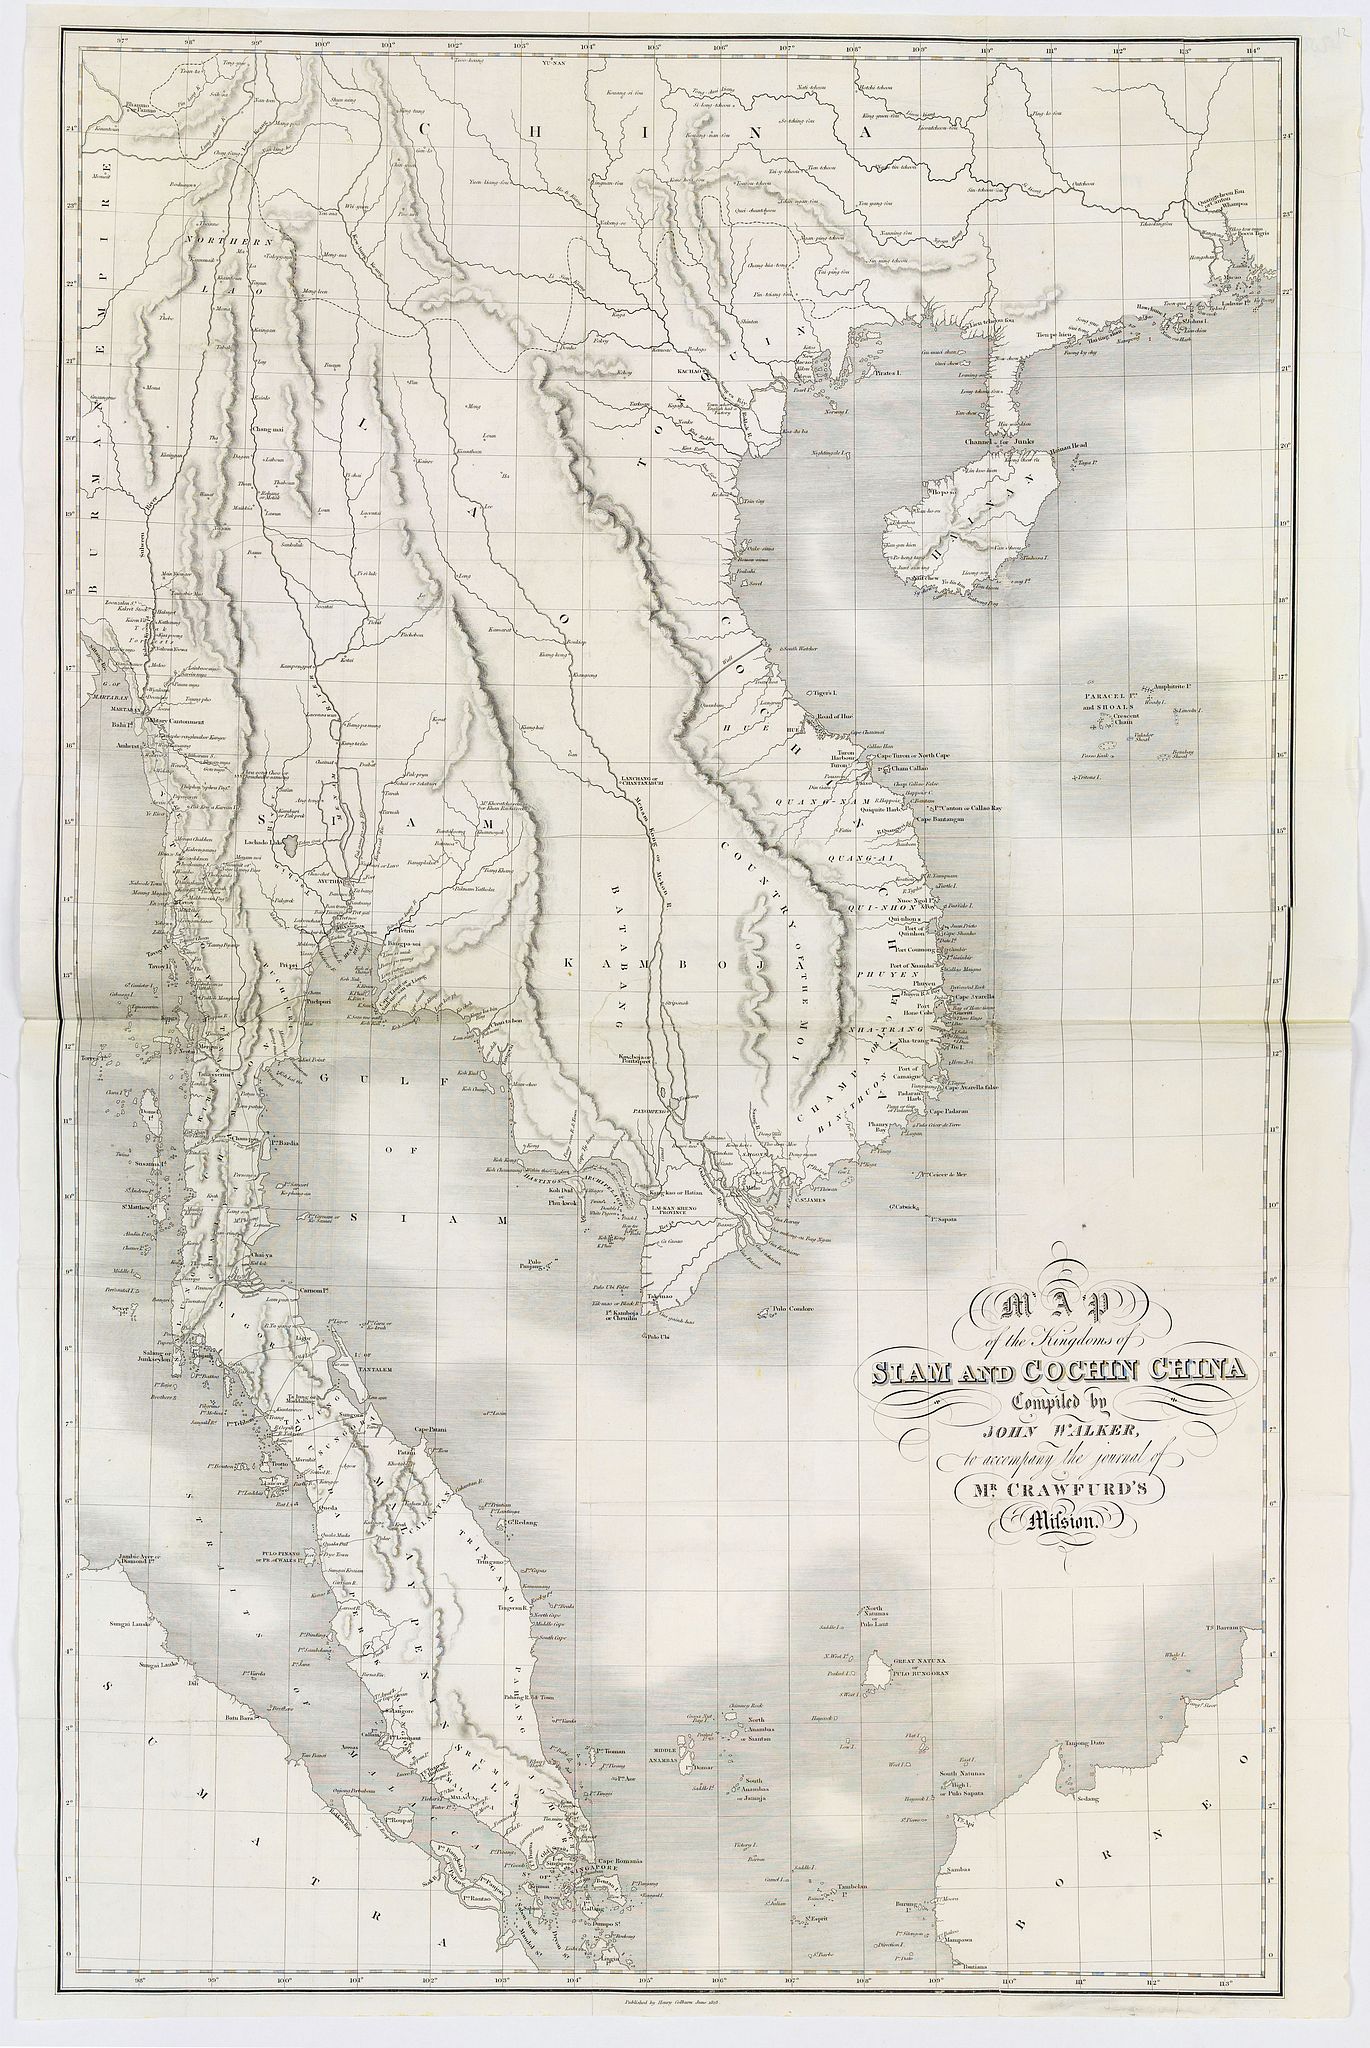 Map of the Kingdoms of Siam and Cochin China compiled by John Walker. . .